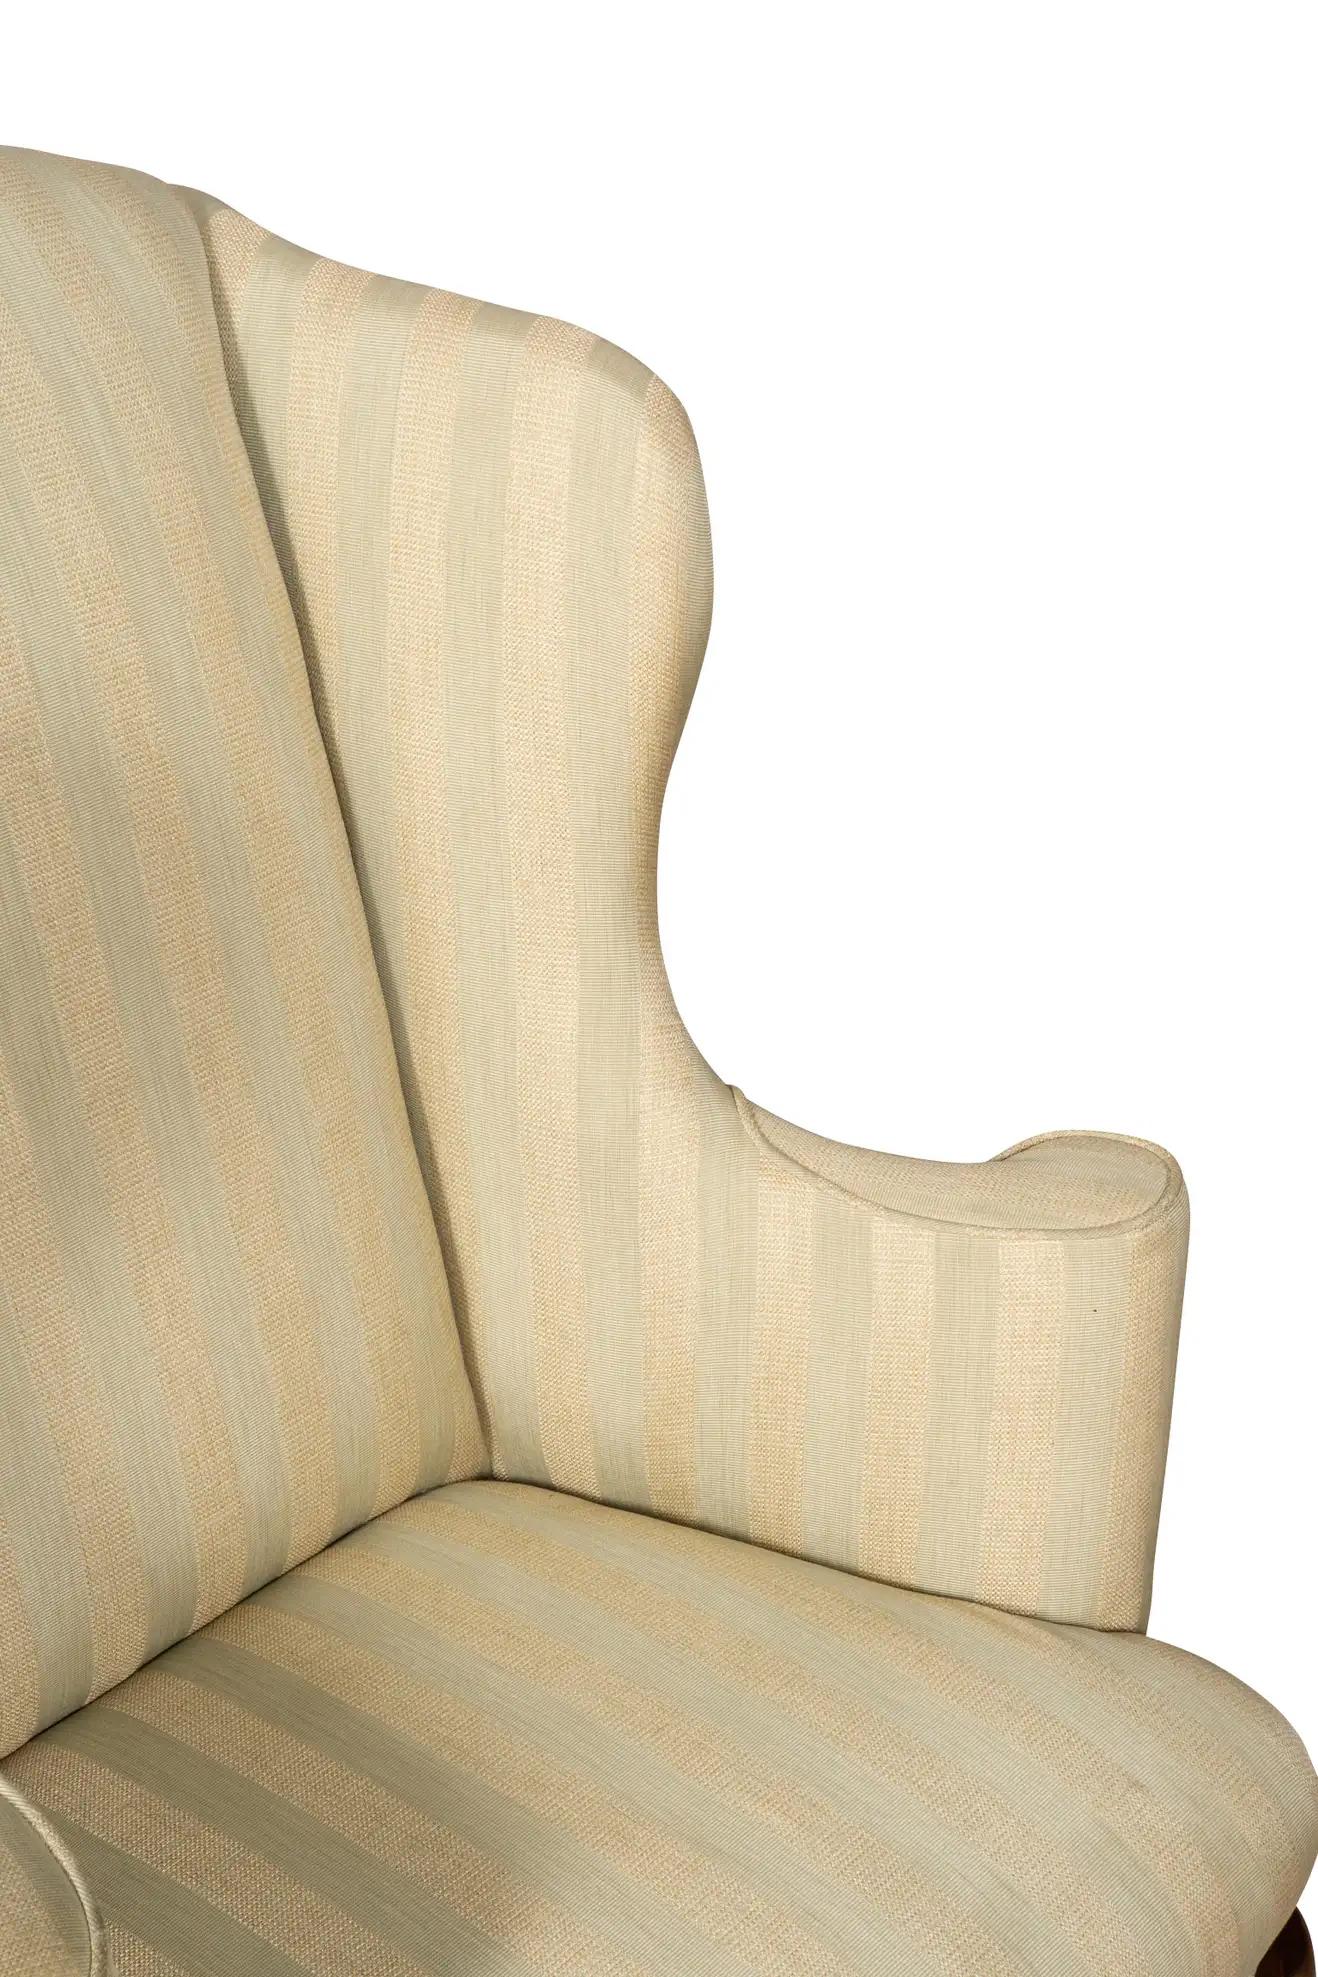 Massachusetts Queen Anne Mahogany Wing Chair For Sale 3